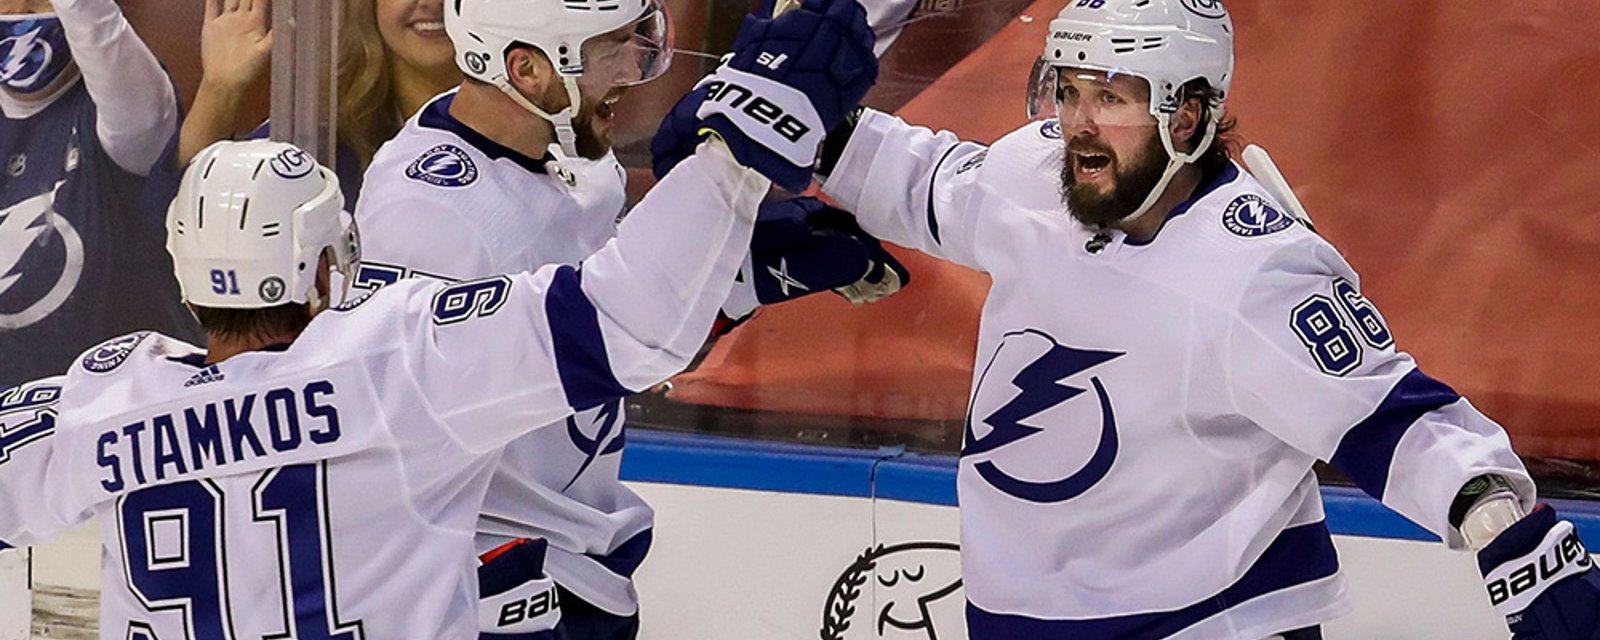 Florida Panthers comment on convenient timing of Nikita Kucherov's return 